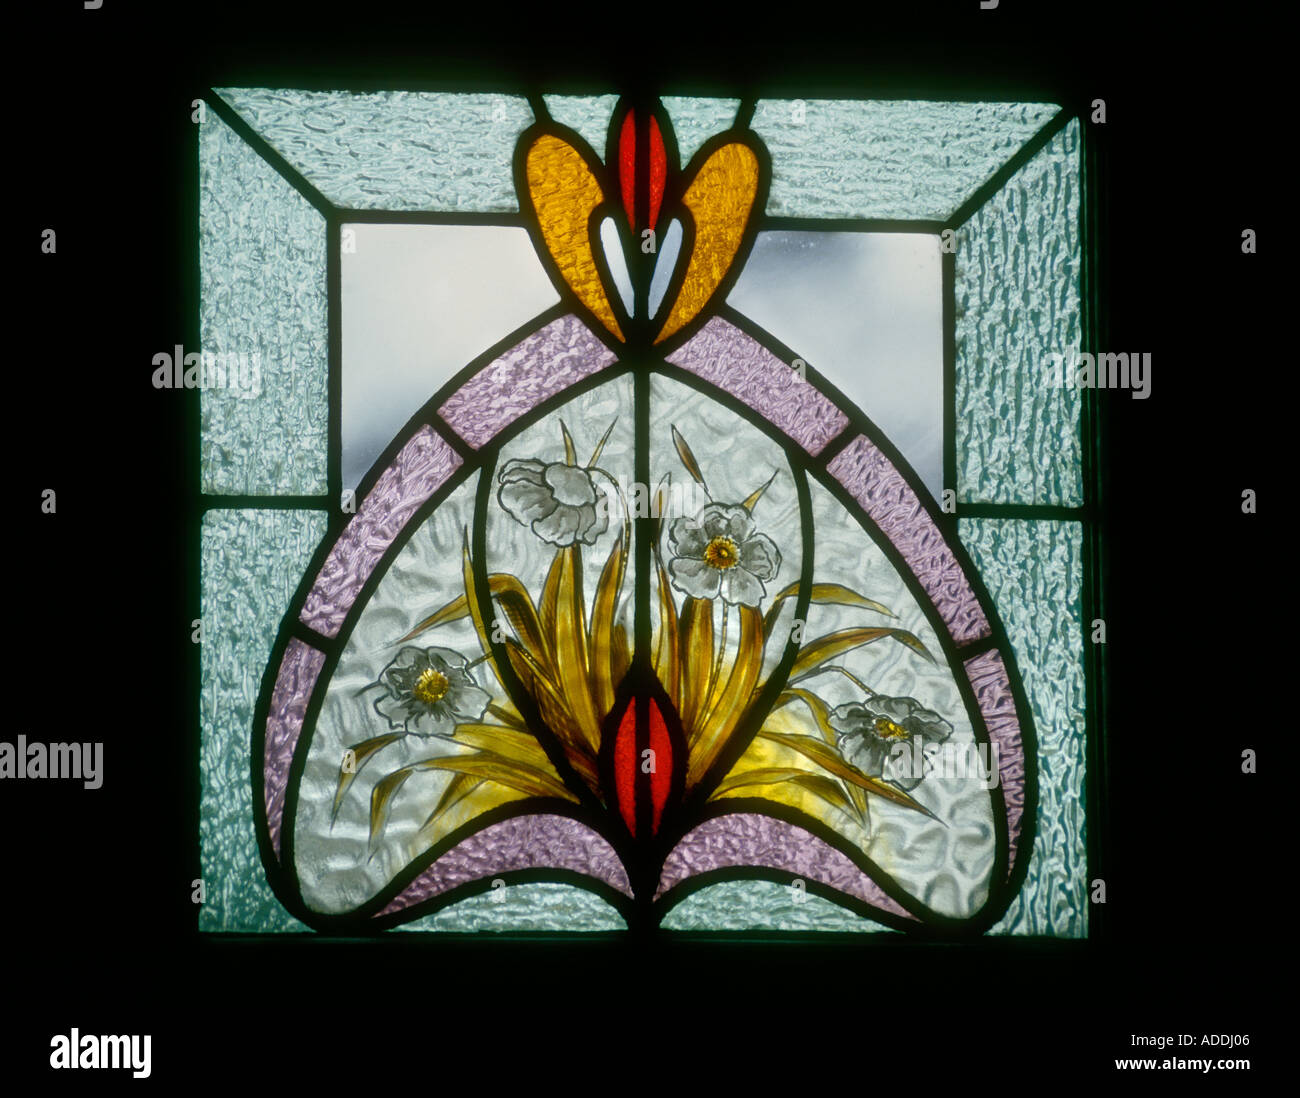 Decorative & Stained Glass - Arizona Glass & Door Connection